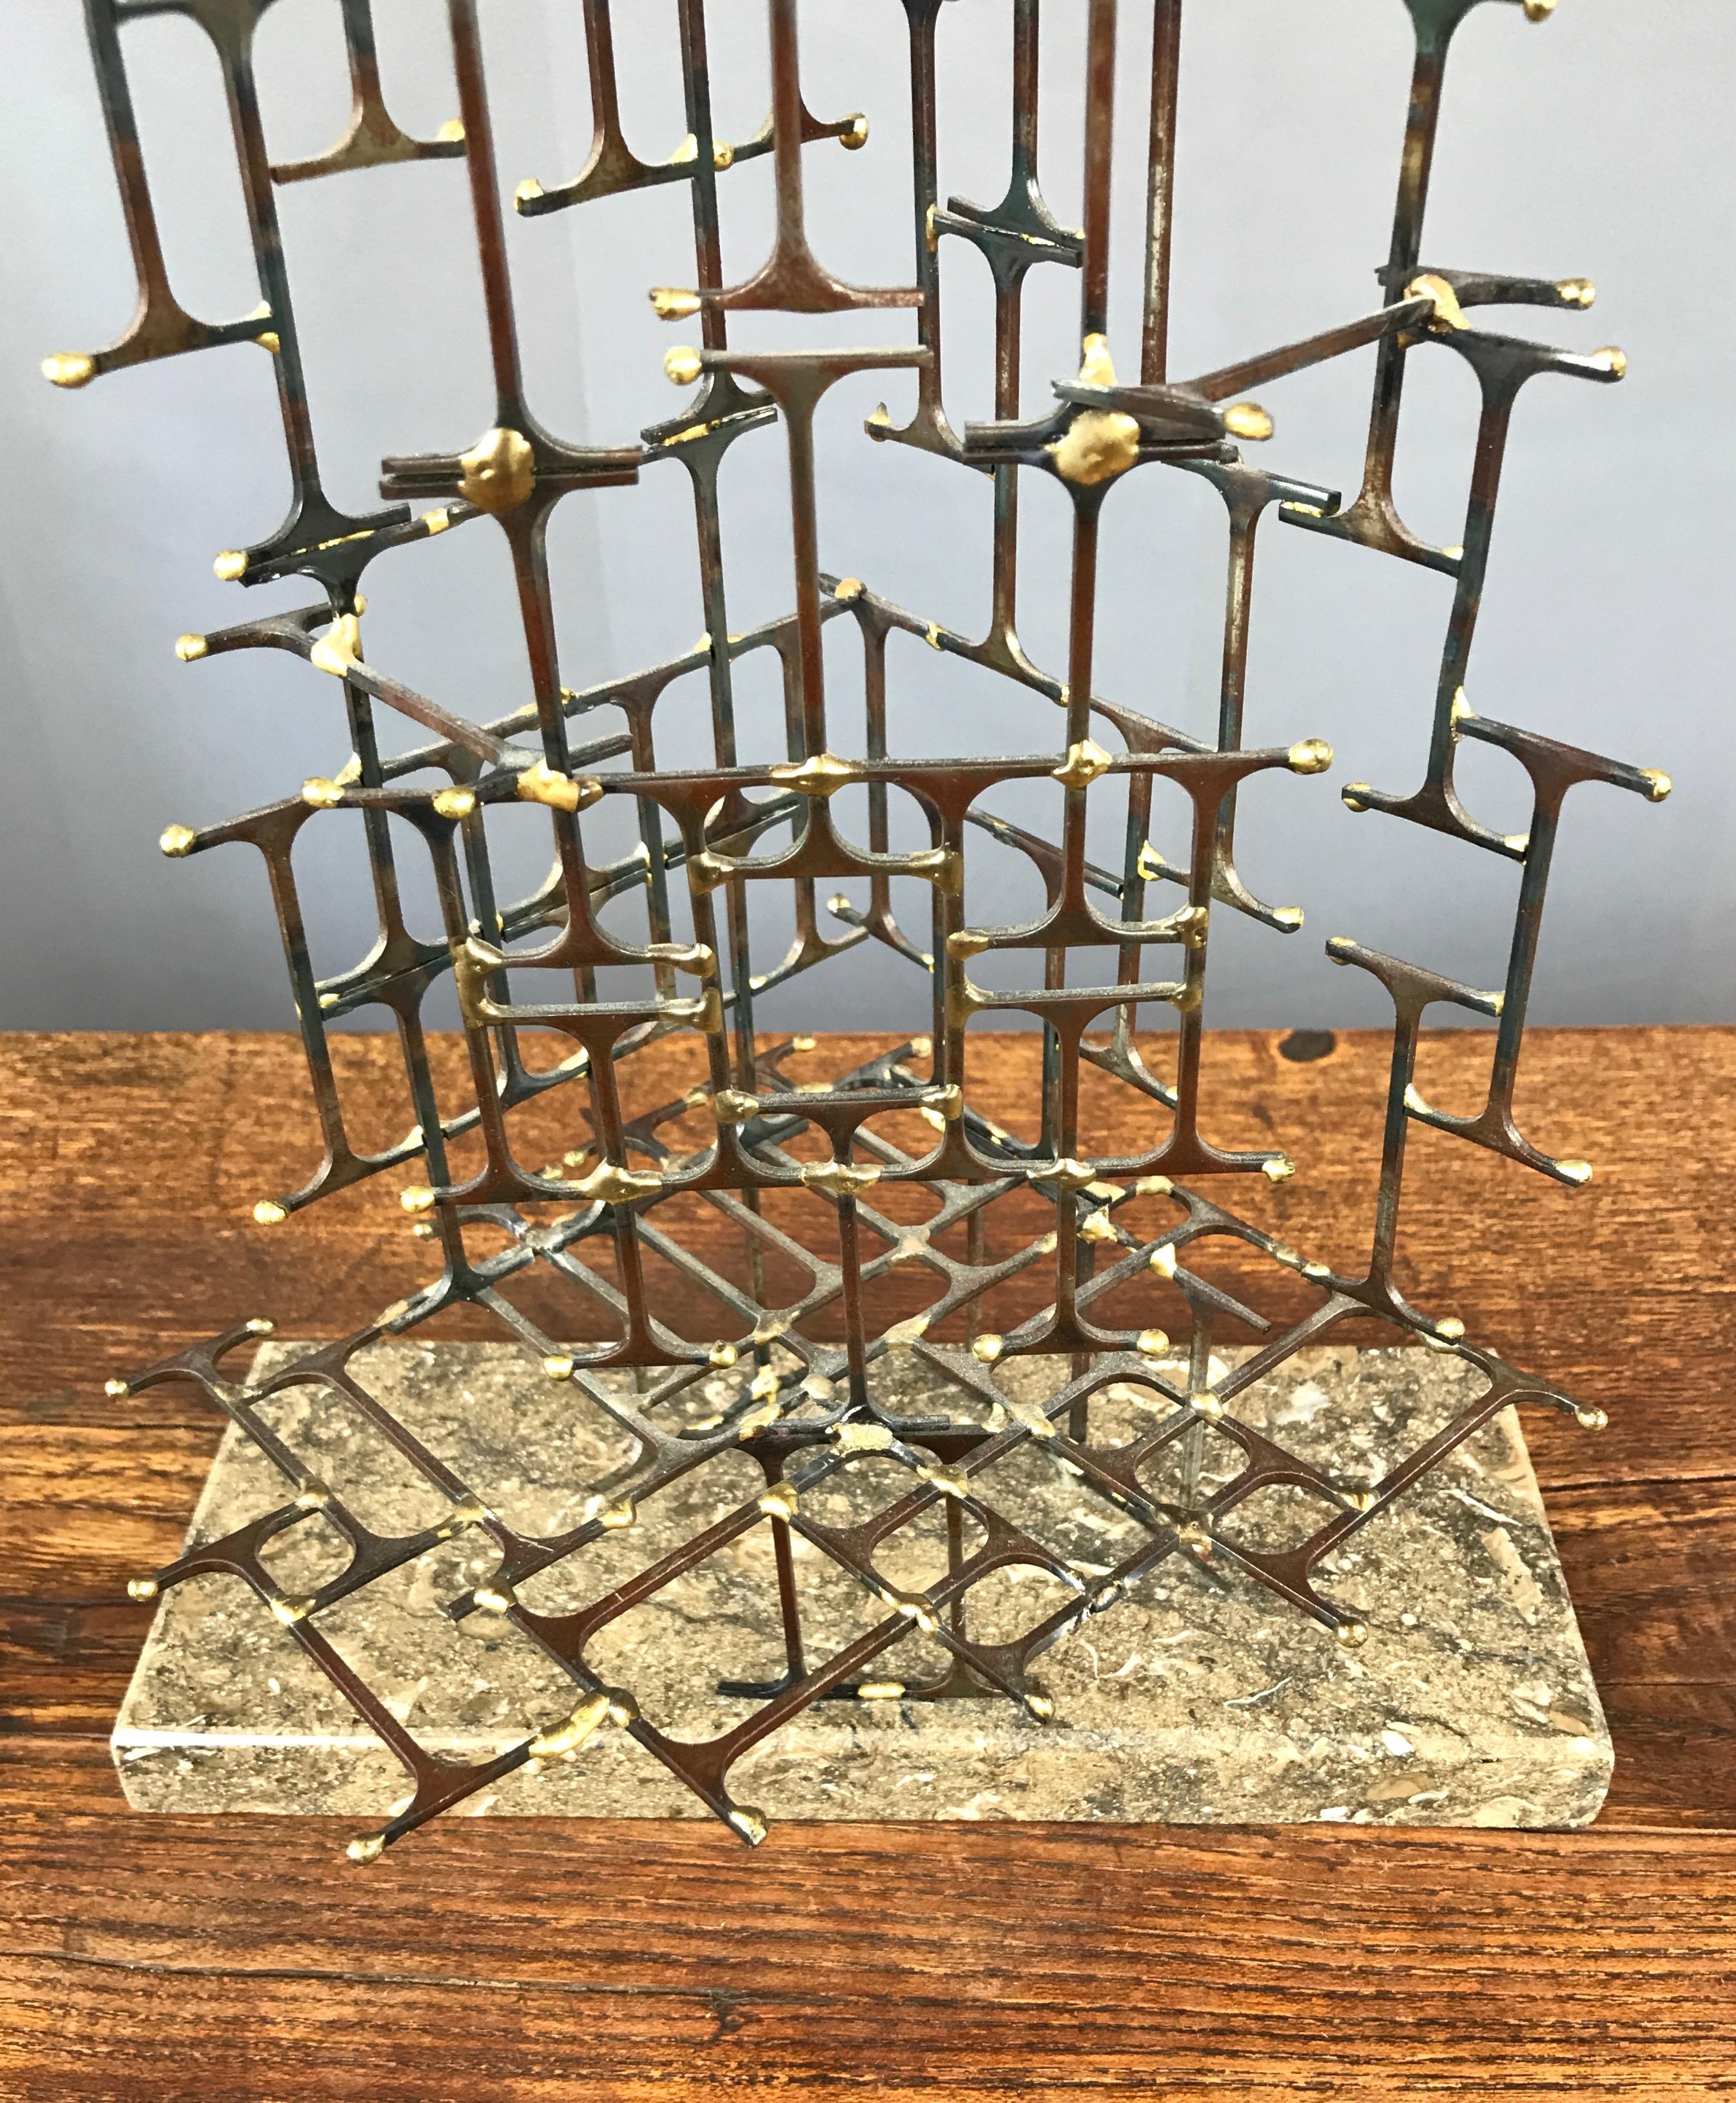 Mario Jason Towering Brutalist Abstract Sculpture, Signed and Dated 2